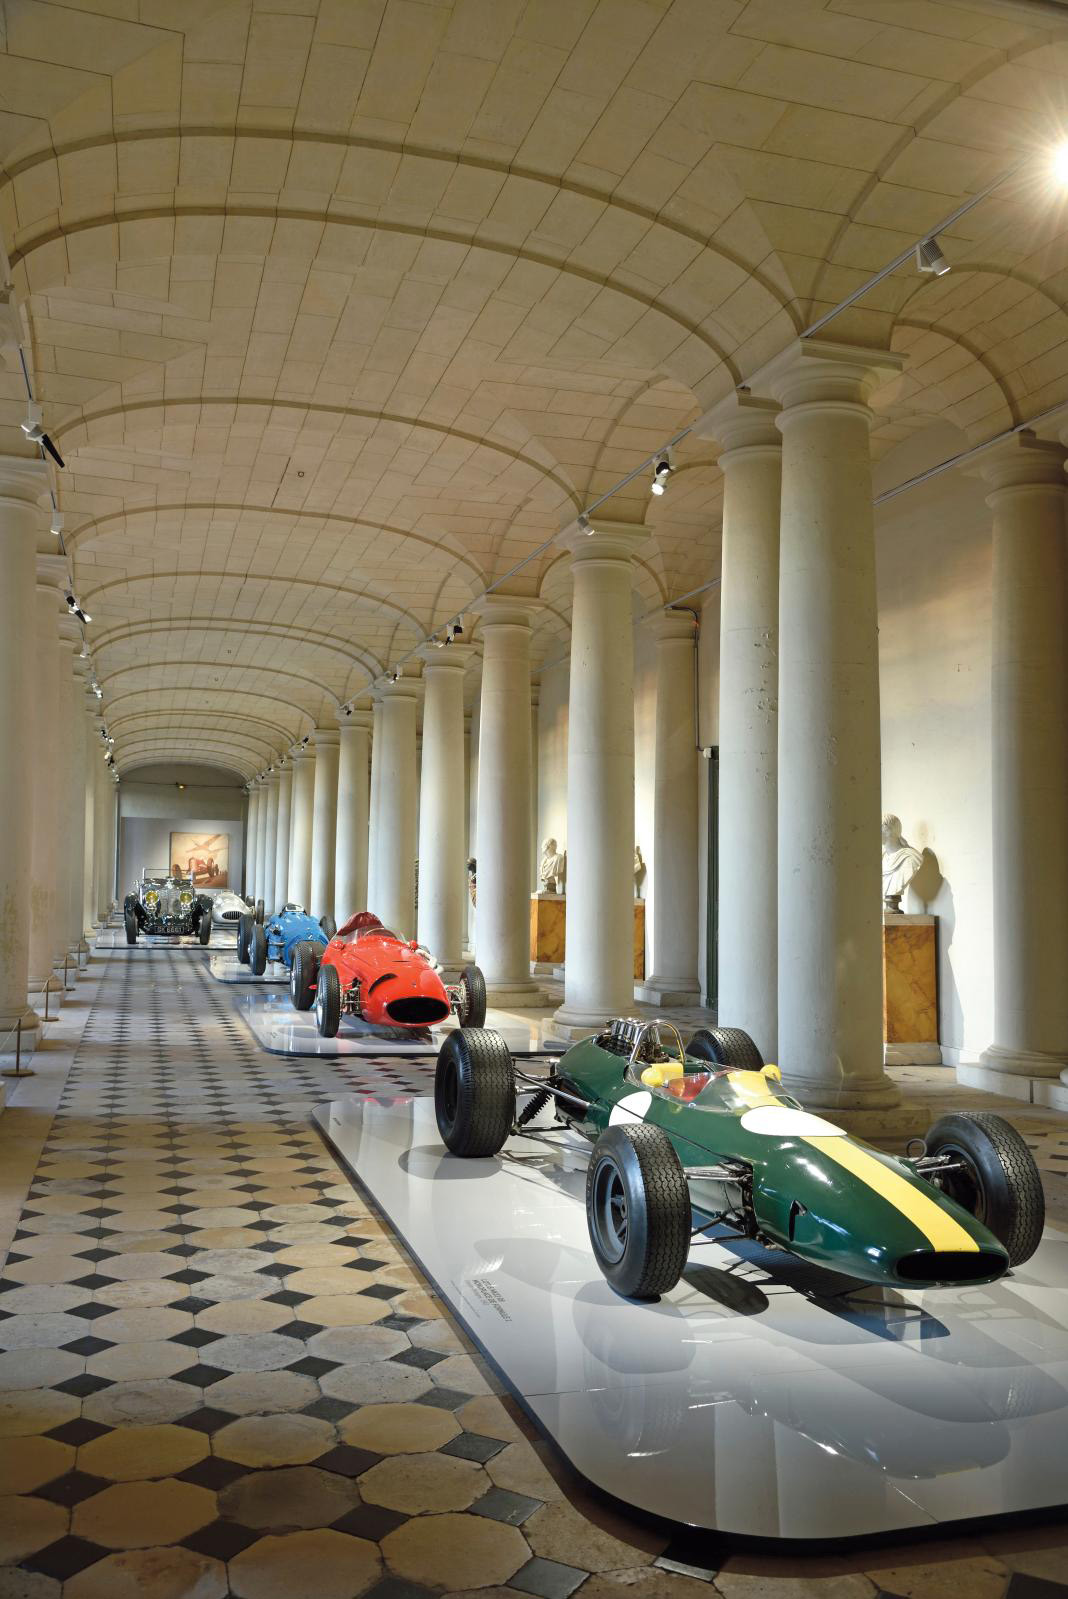 “Vitesse”, an Exhibition Dedicated to Speed in Compiègne